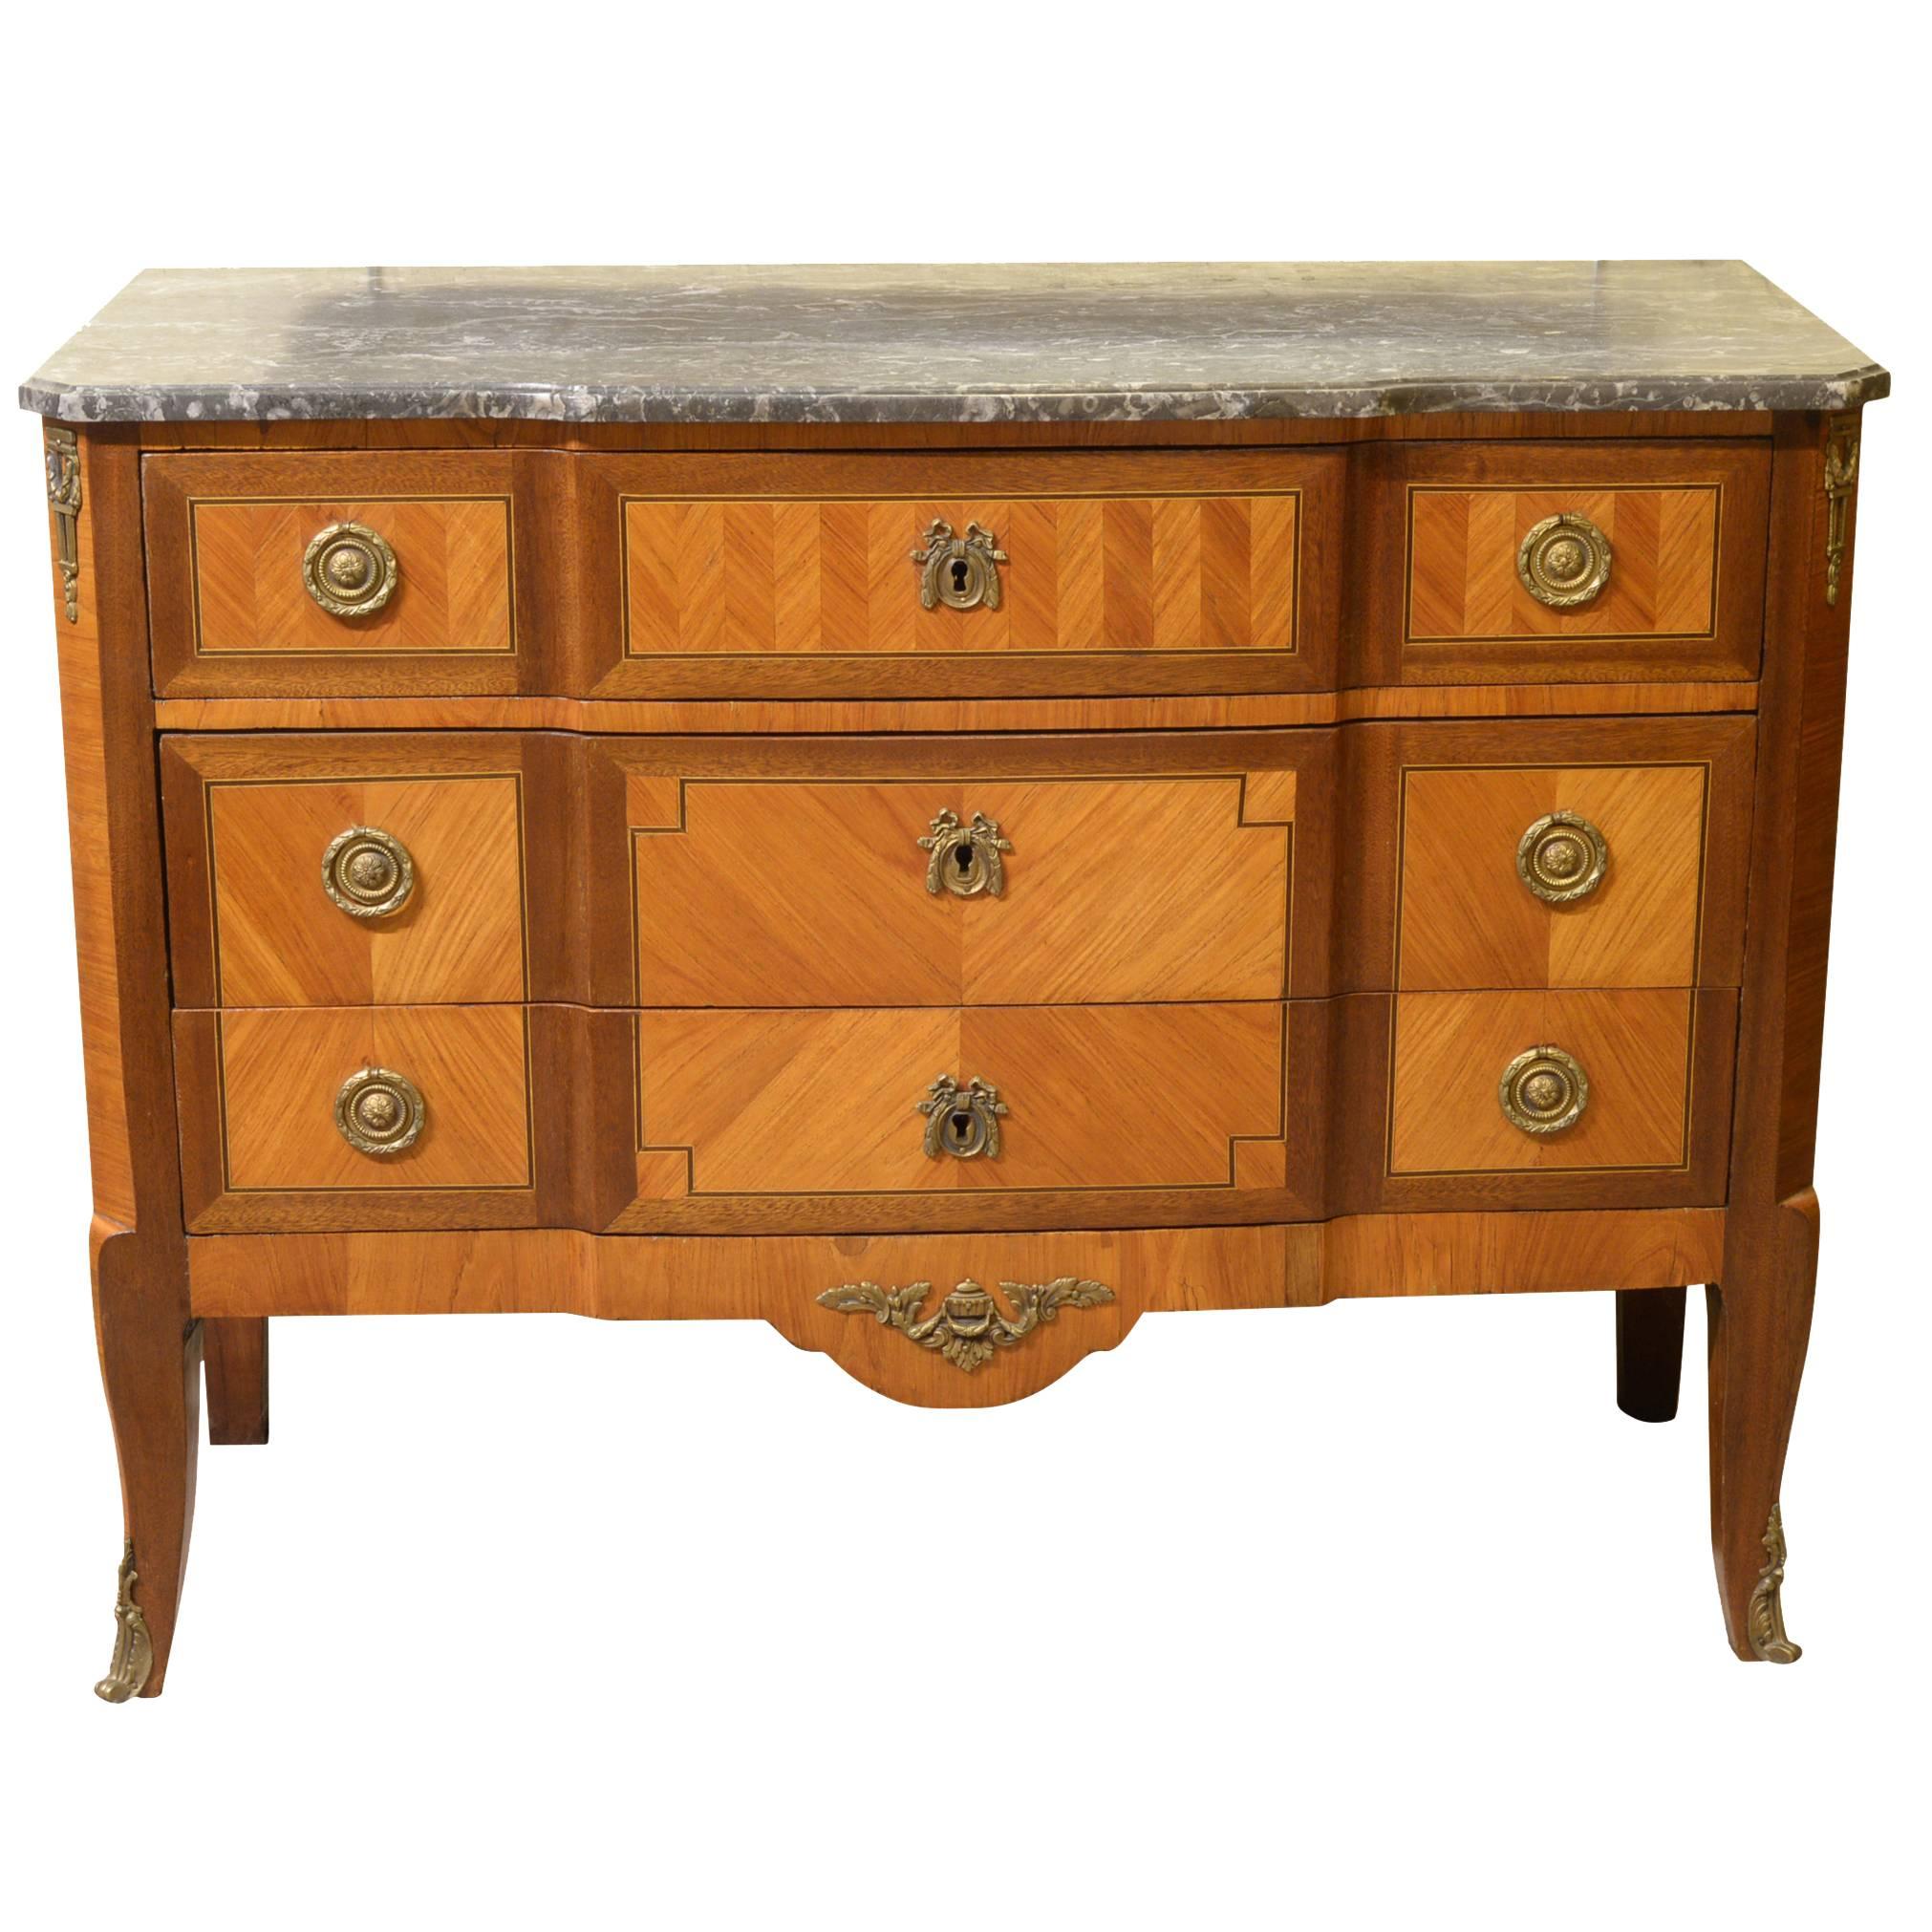 French Transitional Style Marble-Topped Commode For Sale